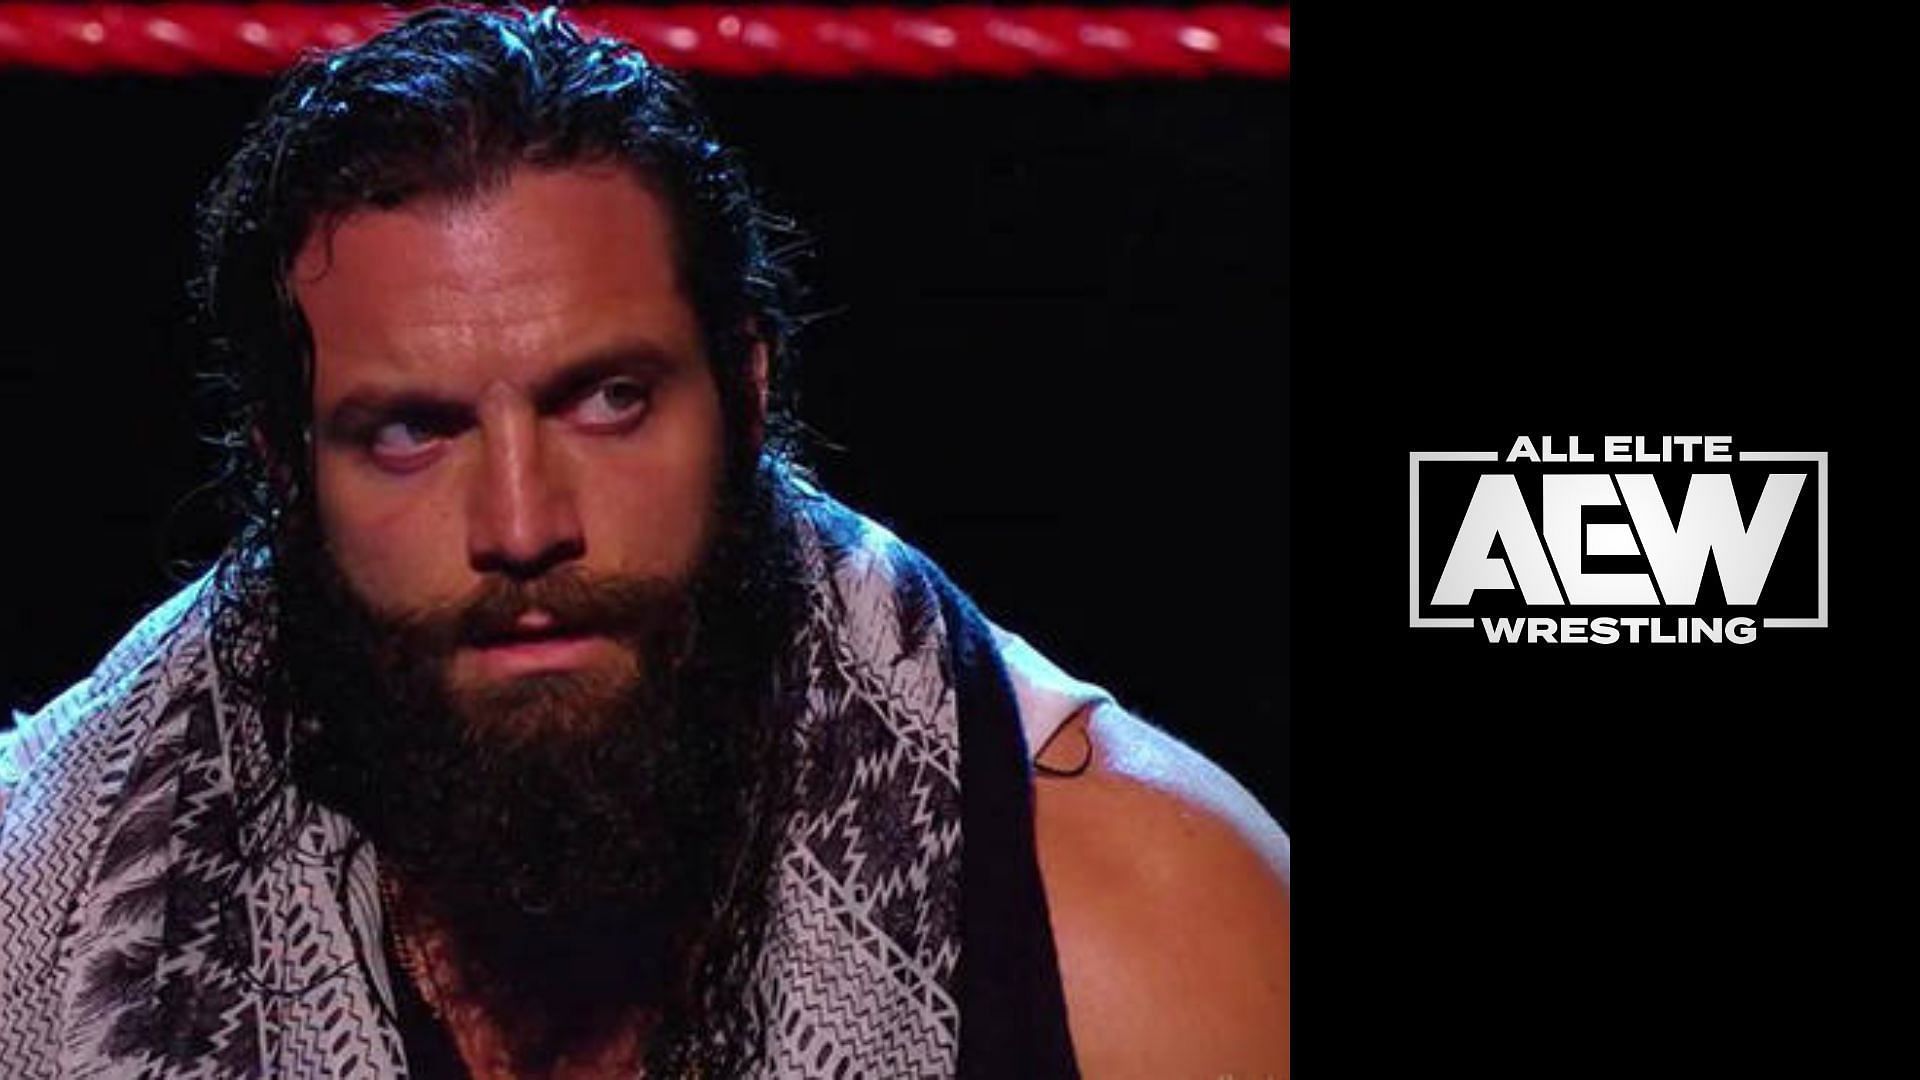 After working in WWE for 9 years, Elias was recently released by the company.